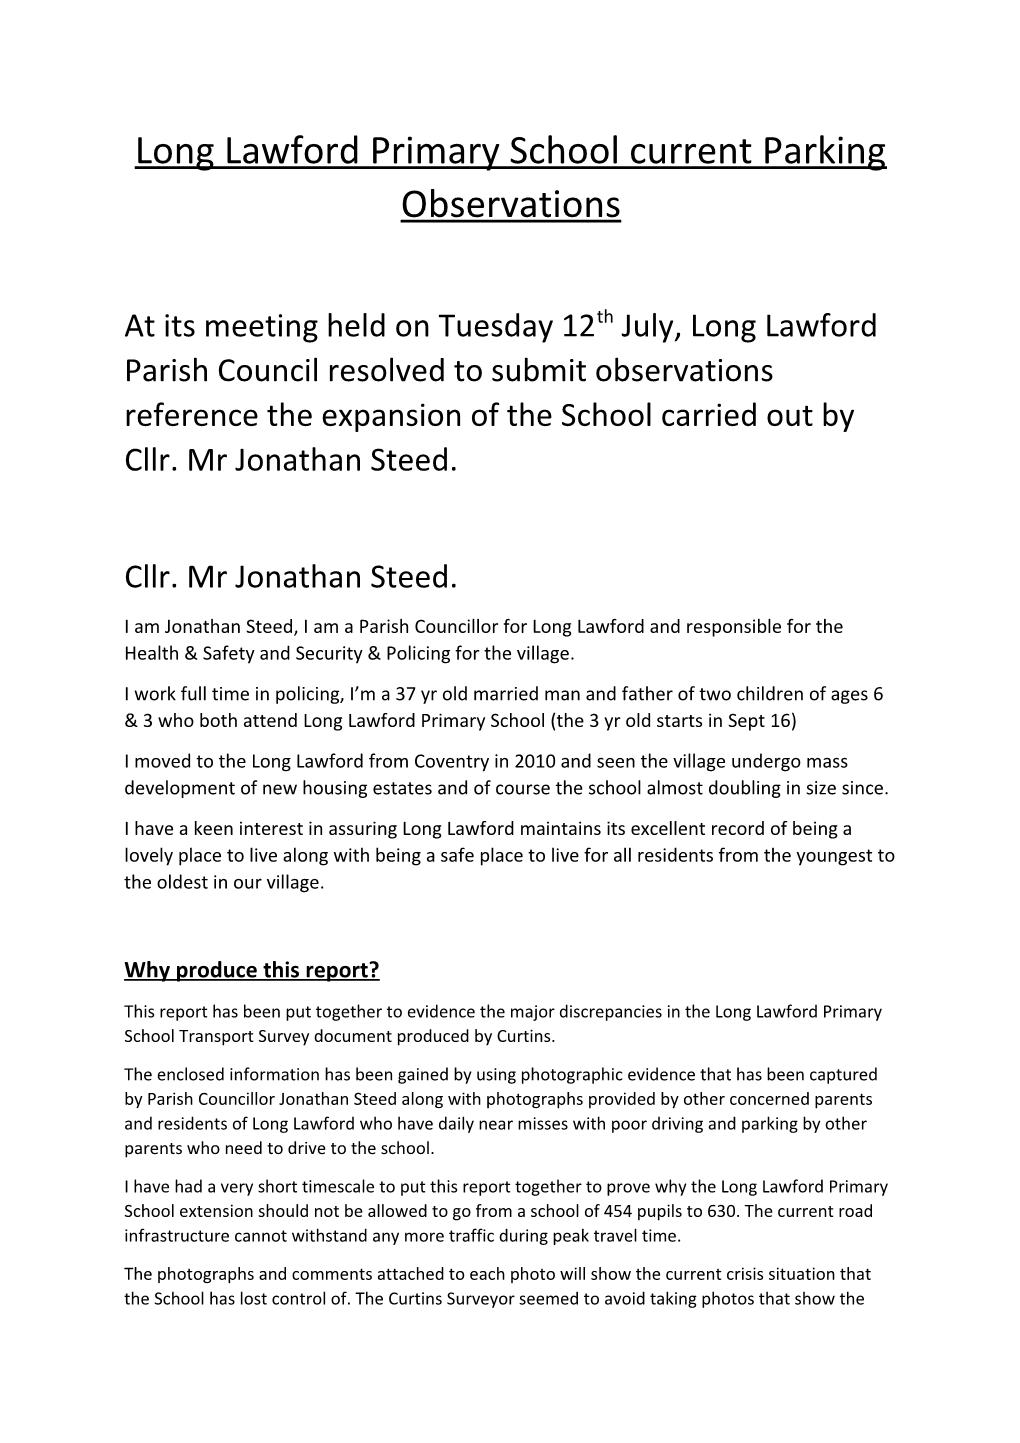 Long Lawford Primary School Current Parking Observations